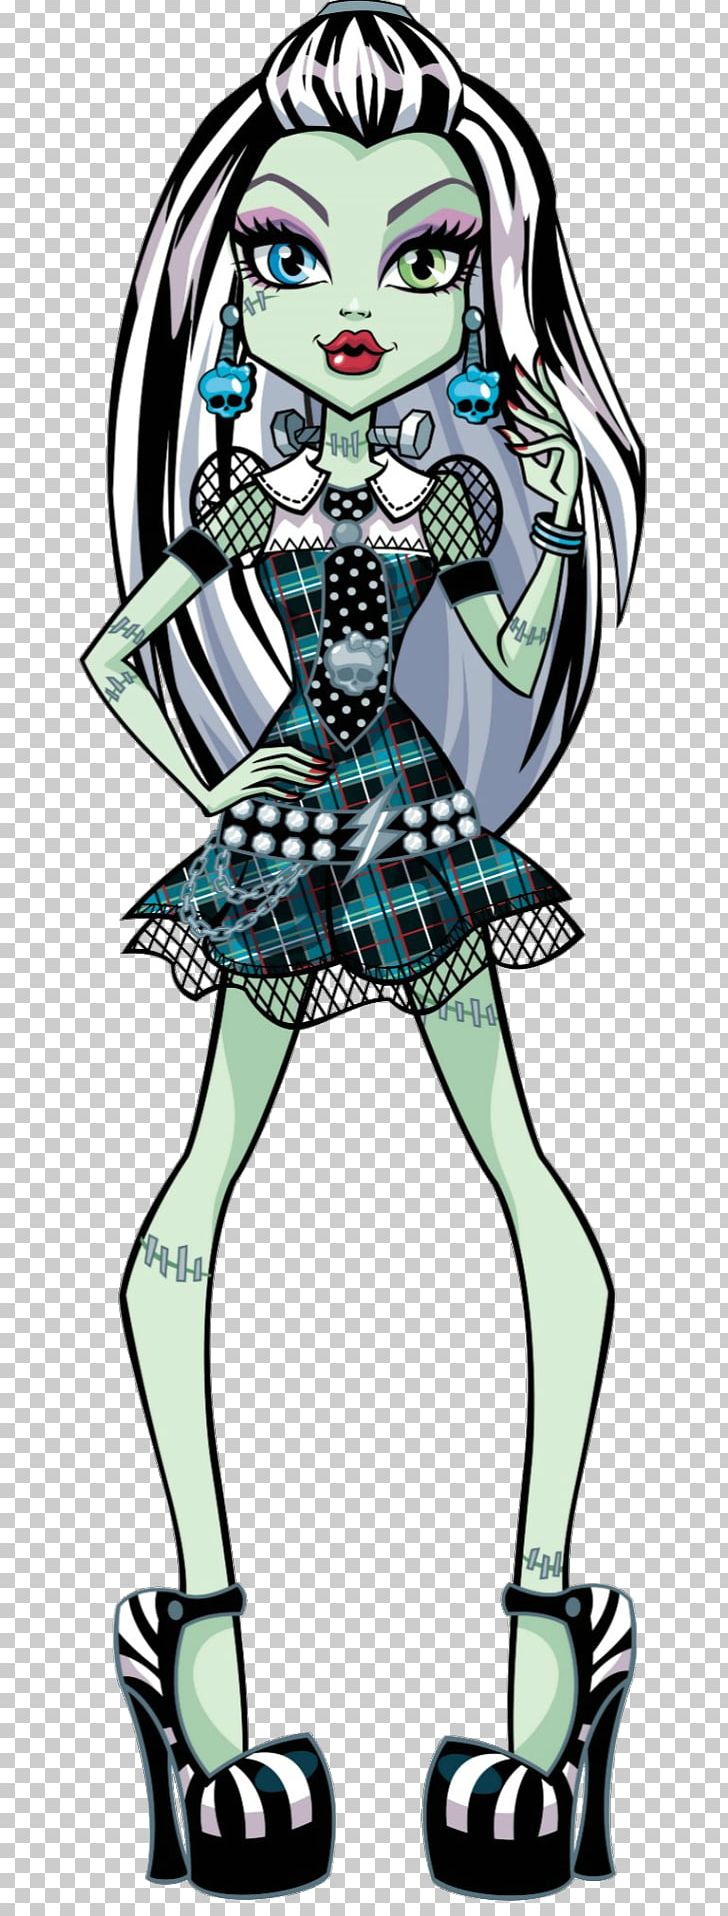 Frankie Stein Frankenstein's Monster Monster High Character PNG, Clipart, Art, Doll, Fictional Character, Human, Miscellaneous Free PNG Download